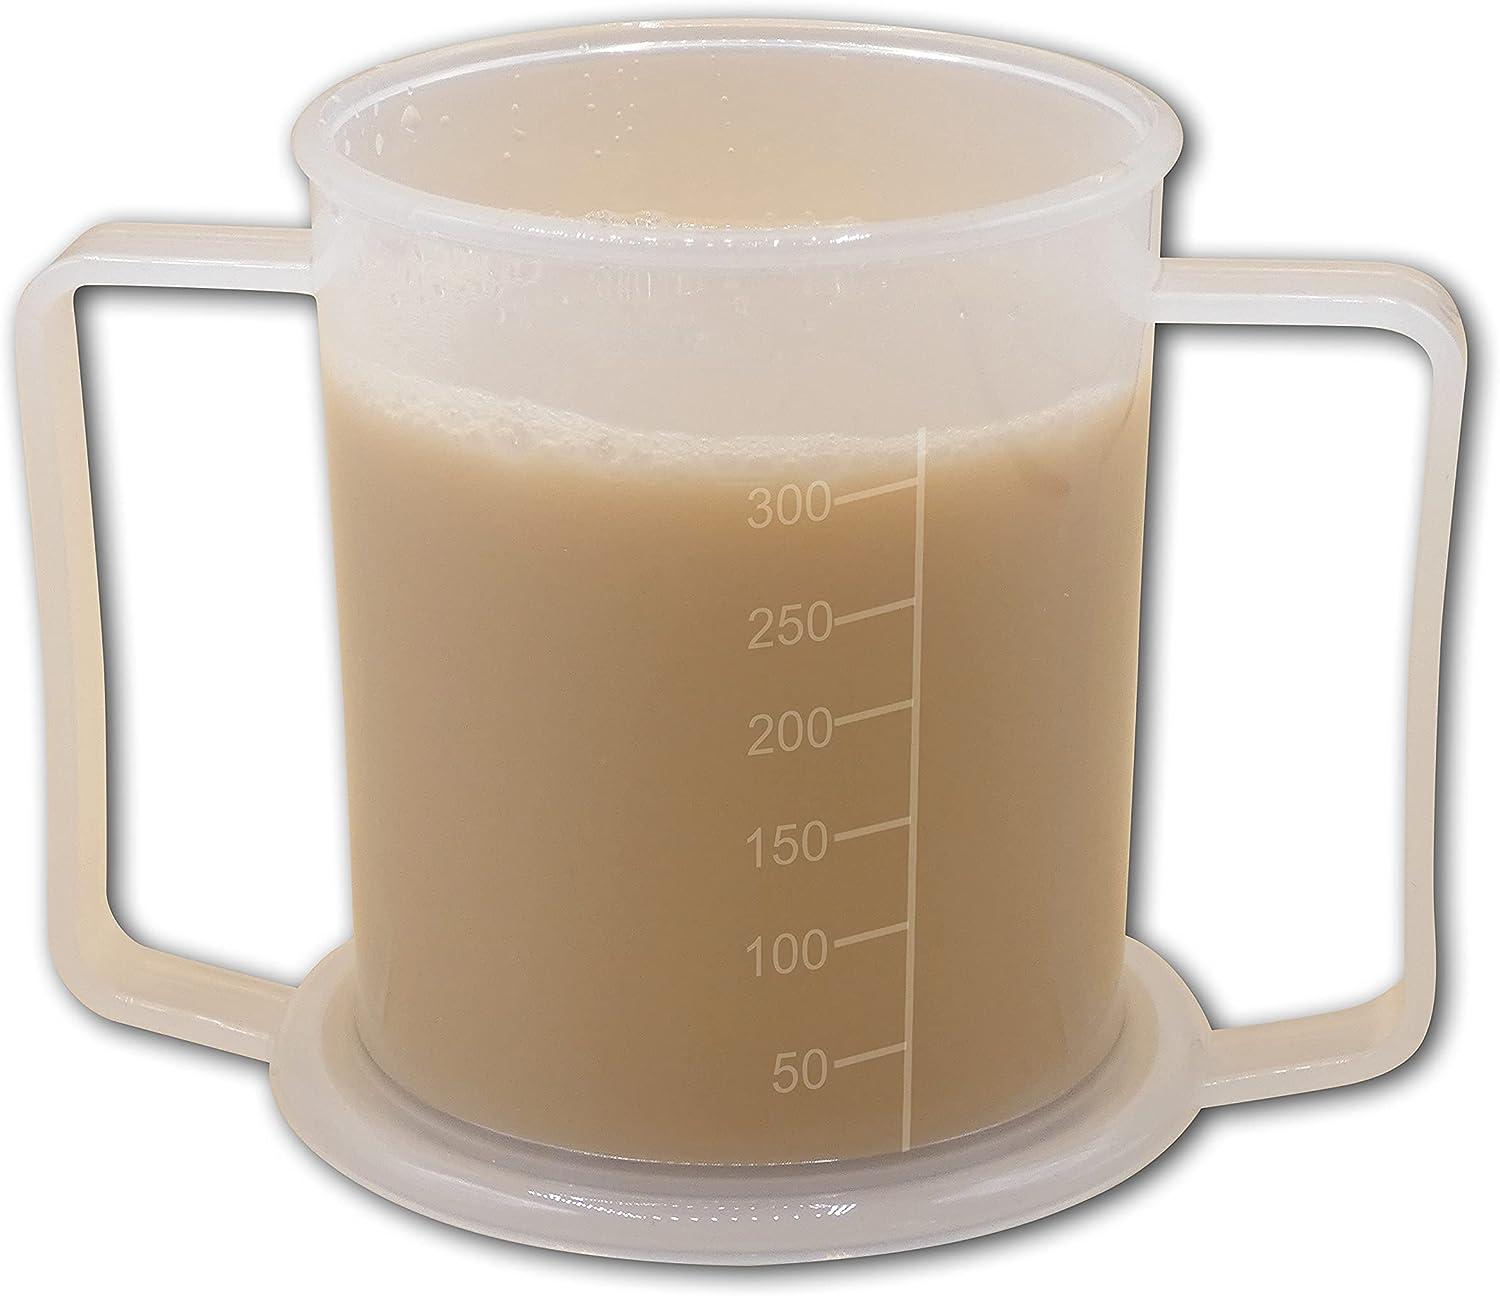 Non Spill Cups For Adults For The Elderly - Page 2 - NRS Healthcare Pro